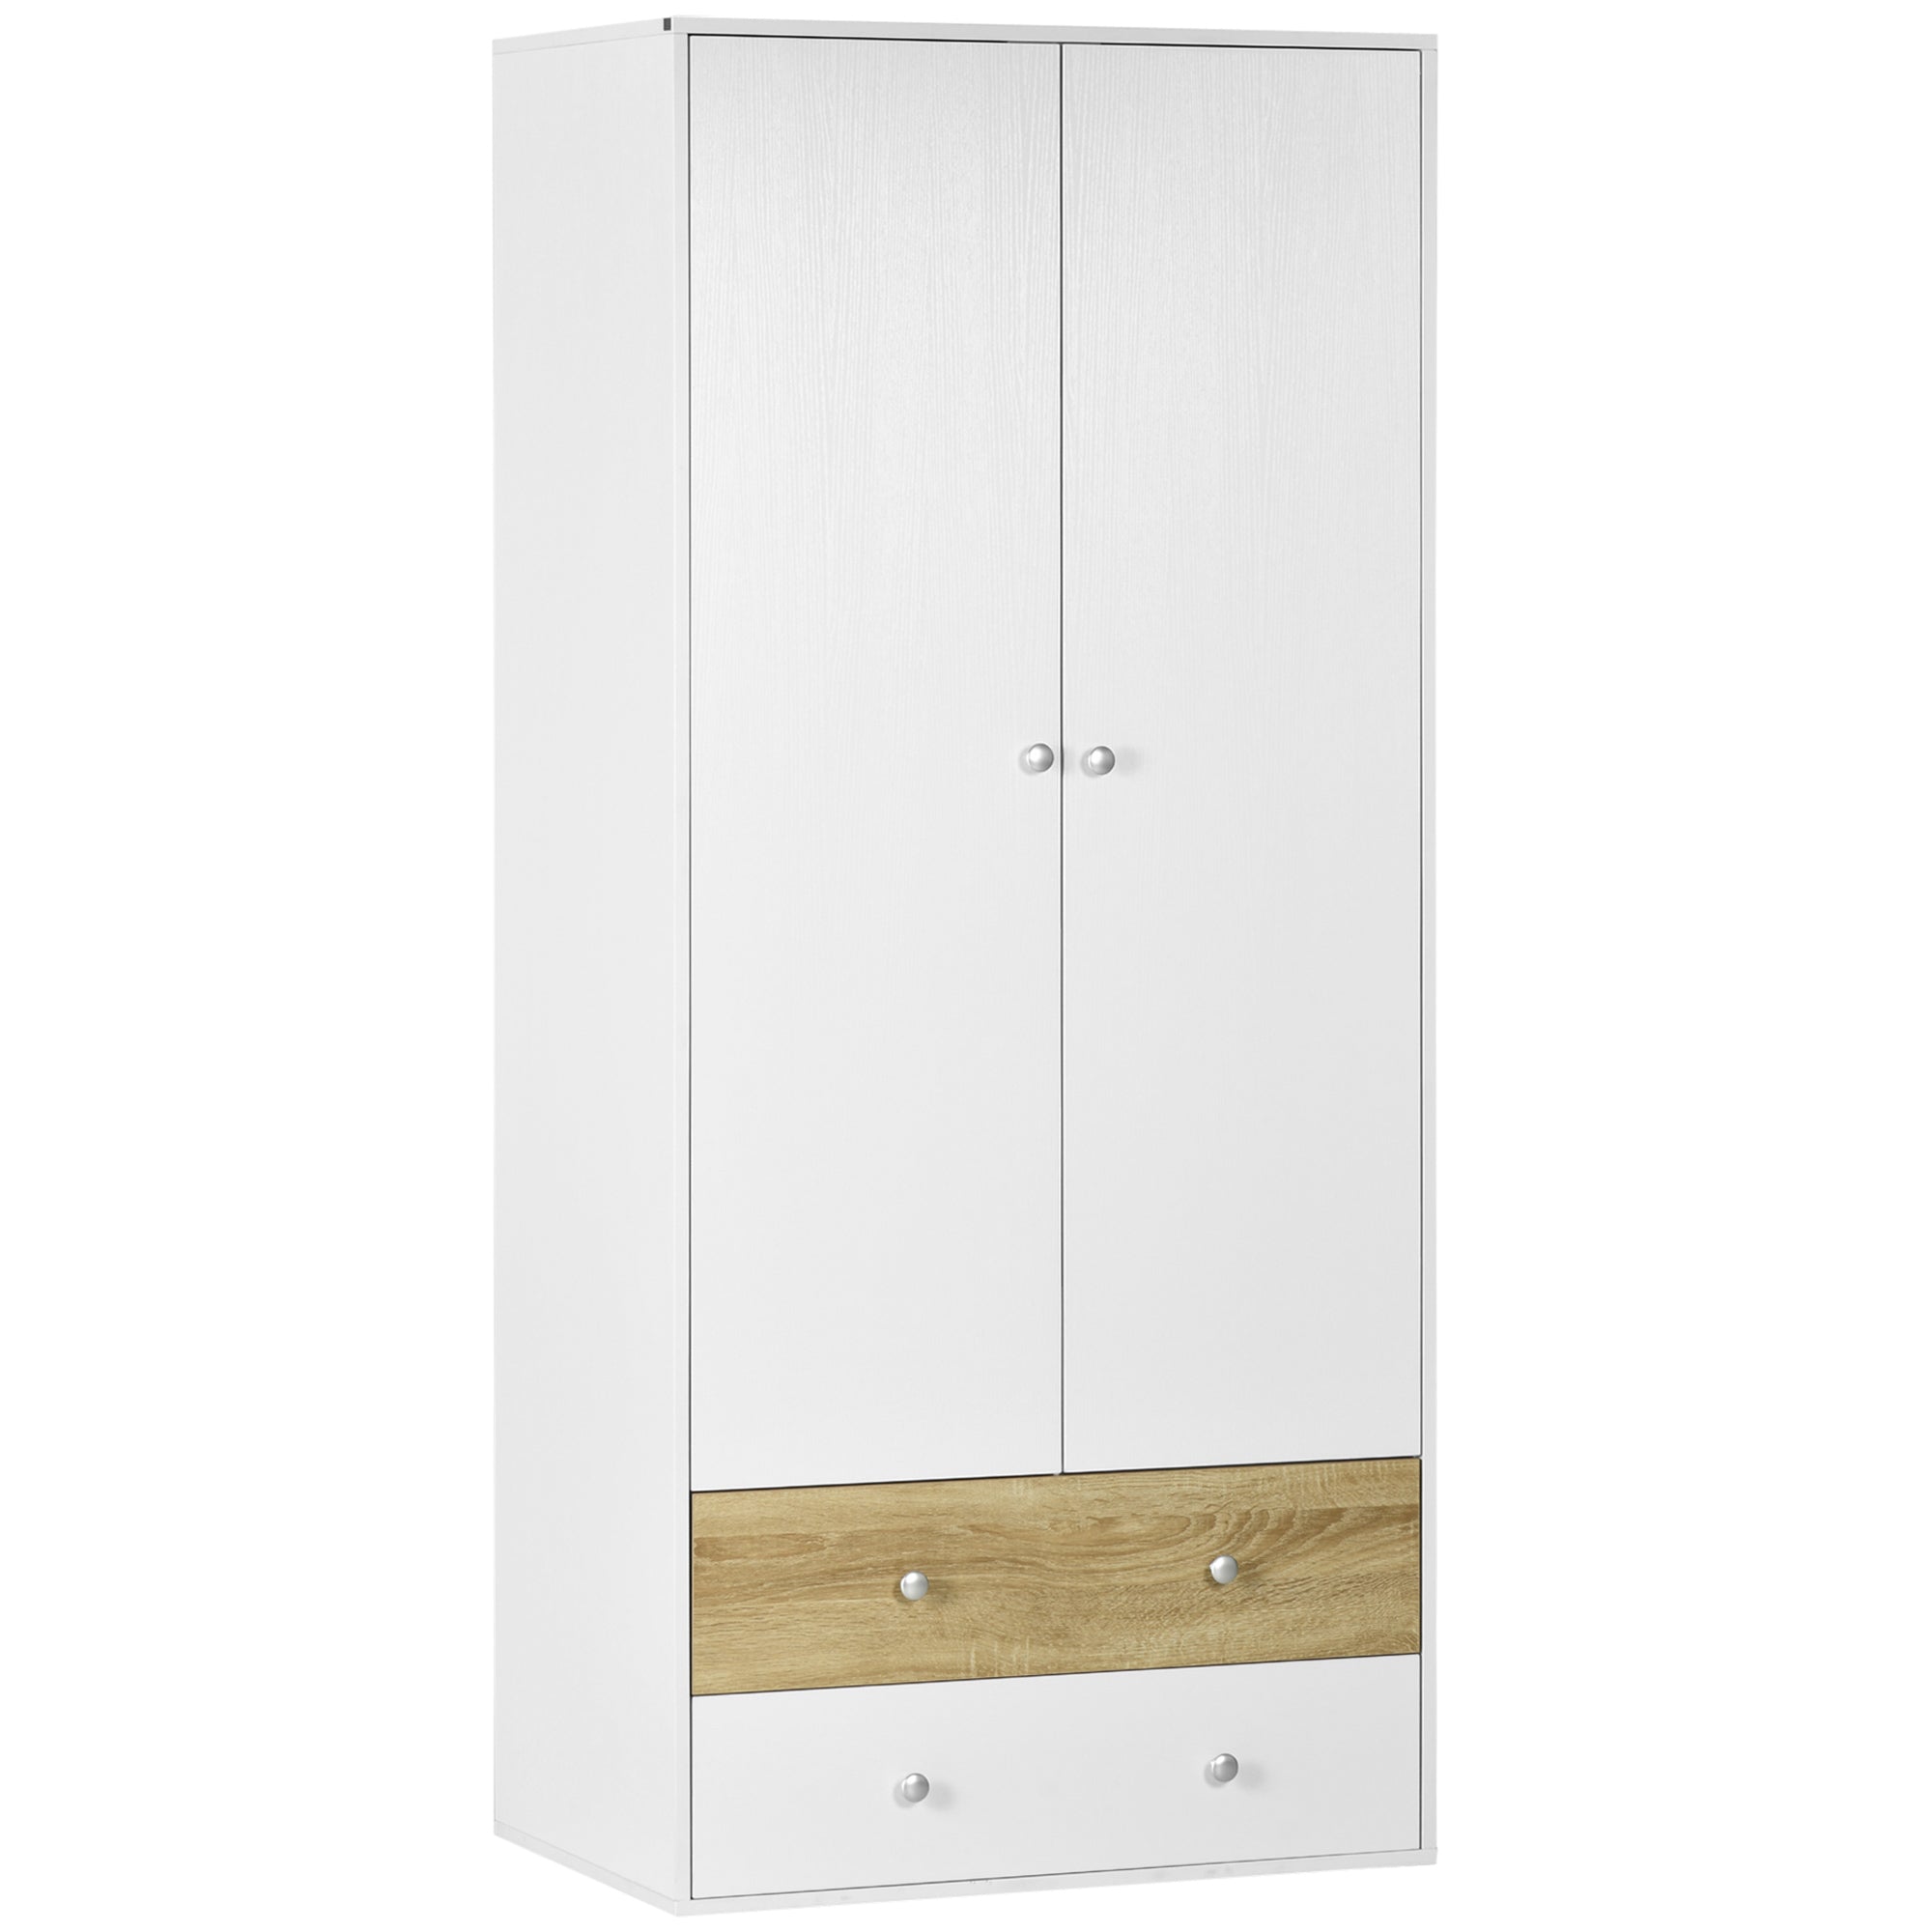 HOMCOM 2 Door Wardrobe White Wardrobe with Drawers and Hanging Rod for Bedroom  | TJ Hughes